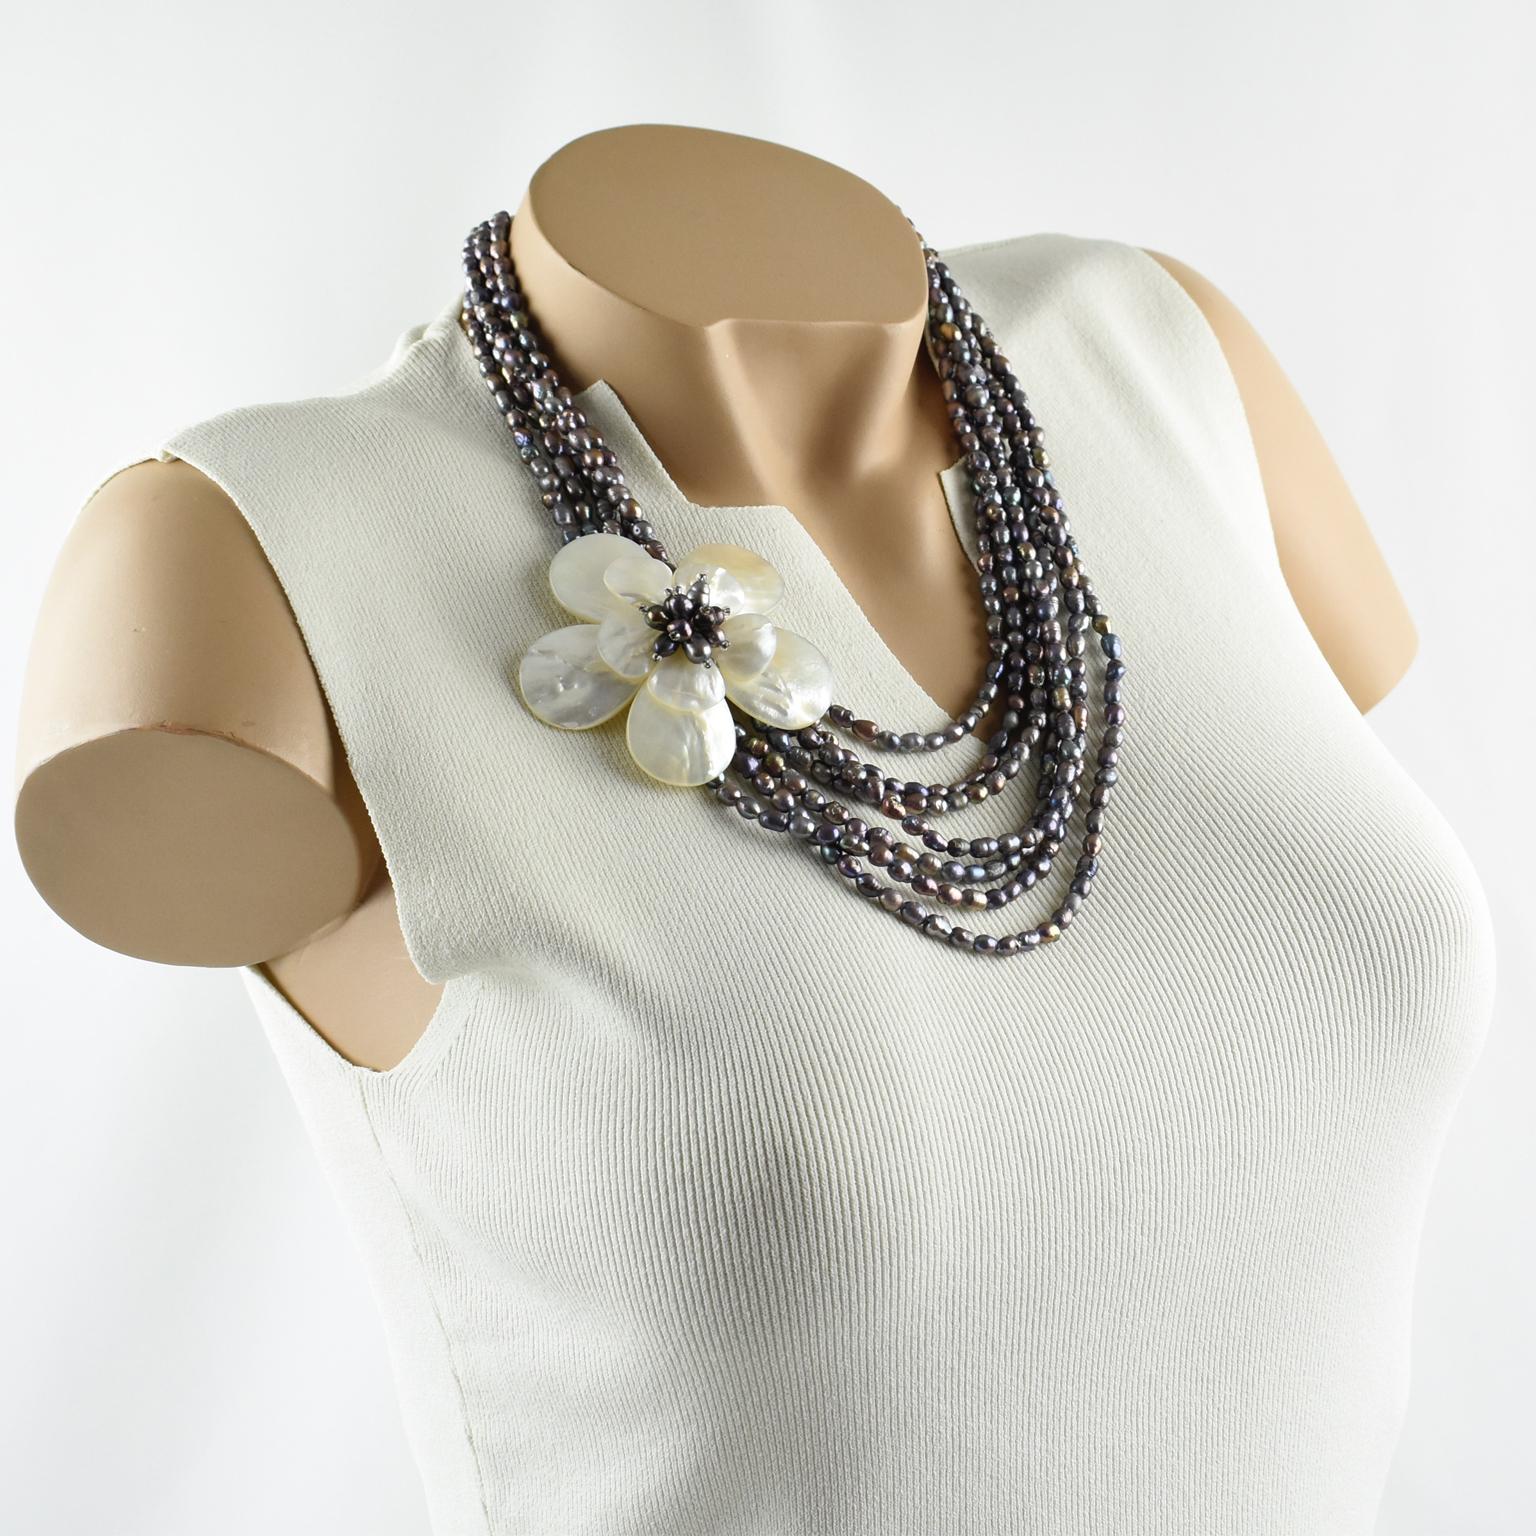 This stunning choker necklace features multi-strand freshwater pearl beads complimented with a floral pendant medallion. The freshwater rice pearls have lovely shimmery gray, black, and smoky pink colors. The central pendant, worn on the side, is